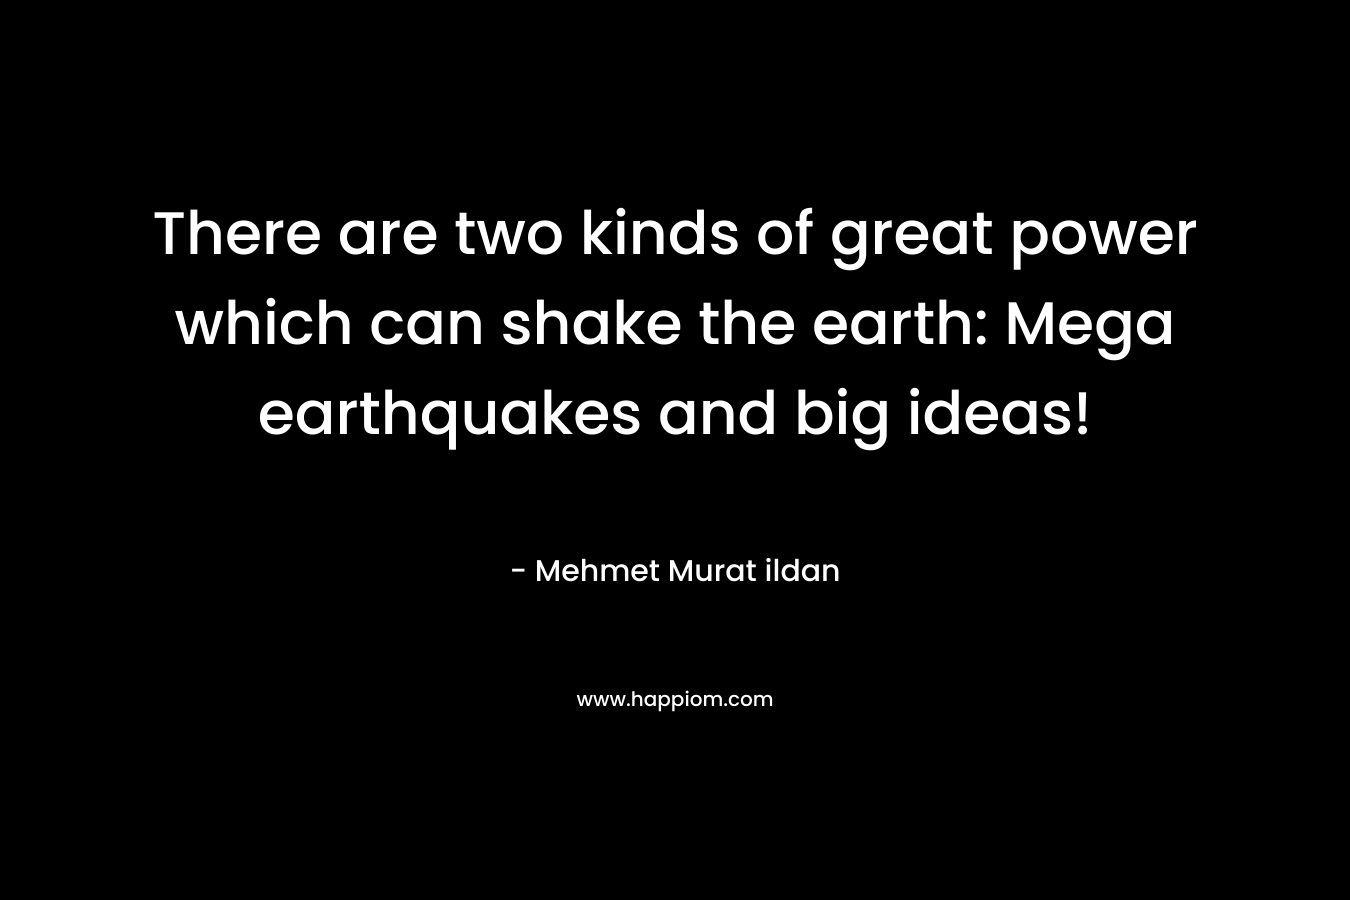 There are two kinds of great power which can shake the earth: Mega earthquakes and big ideas! – Mehmet Murat ildan